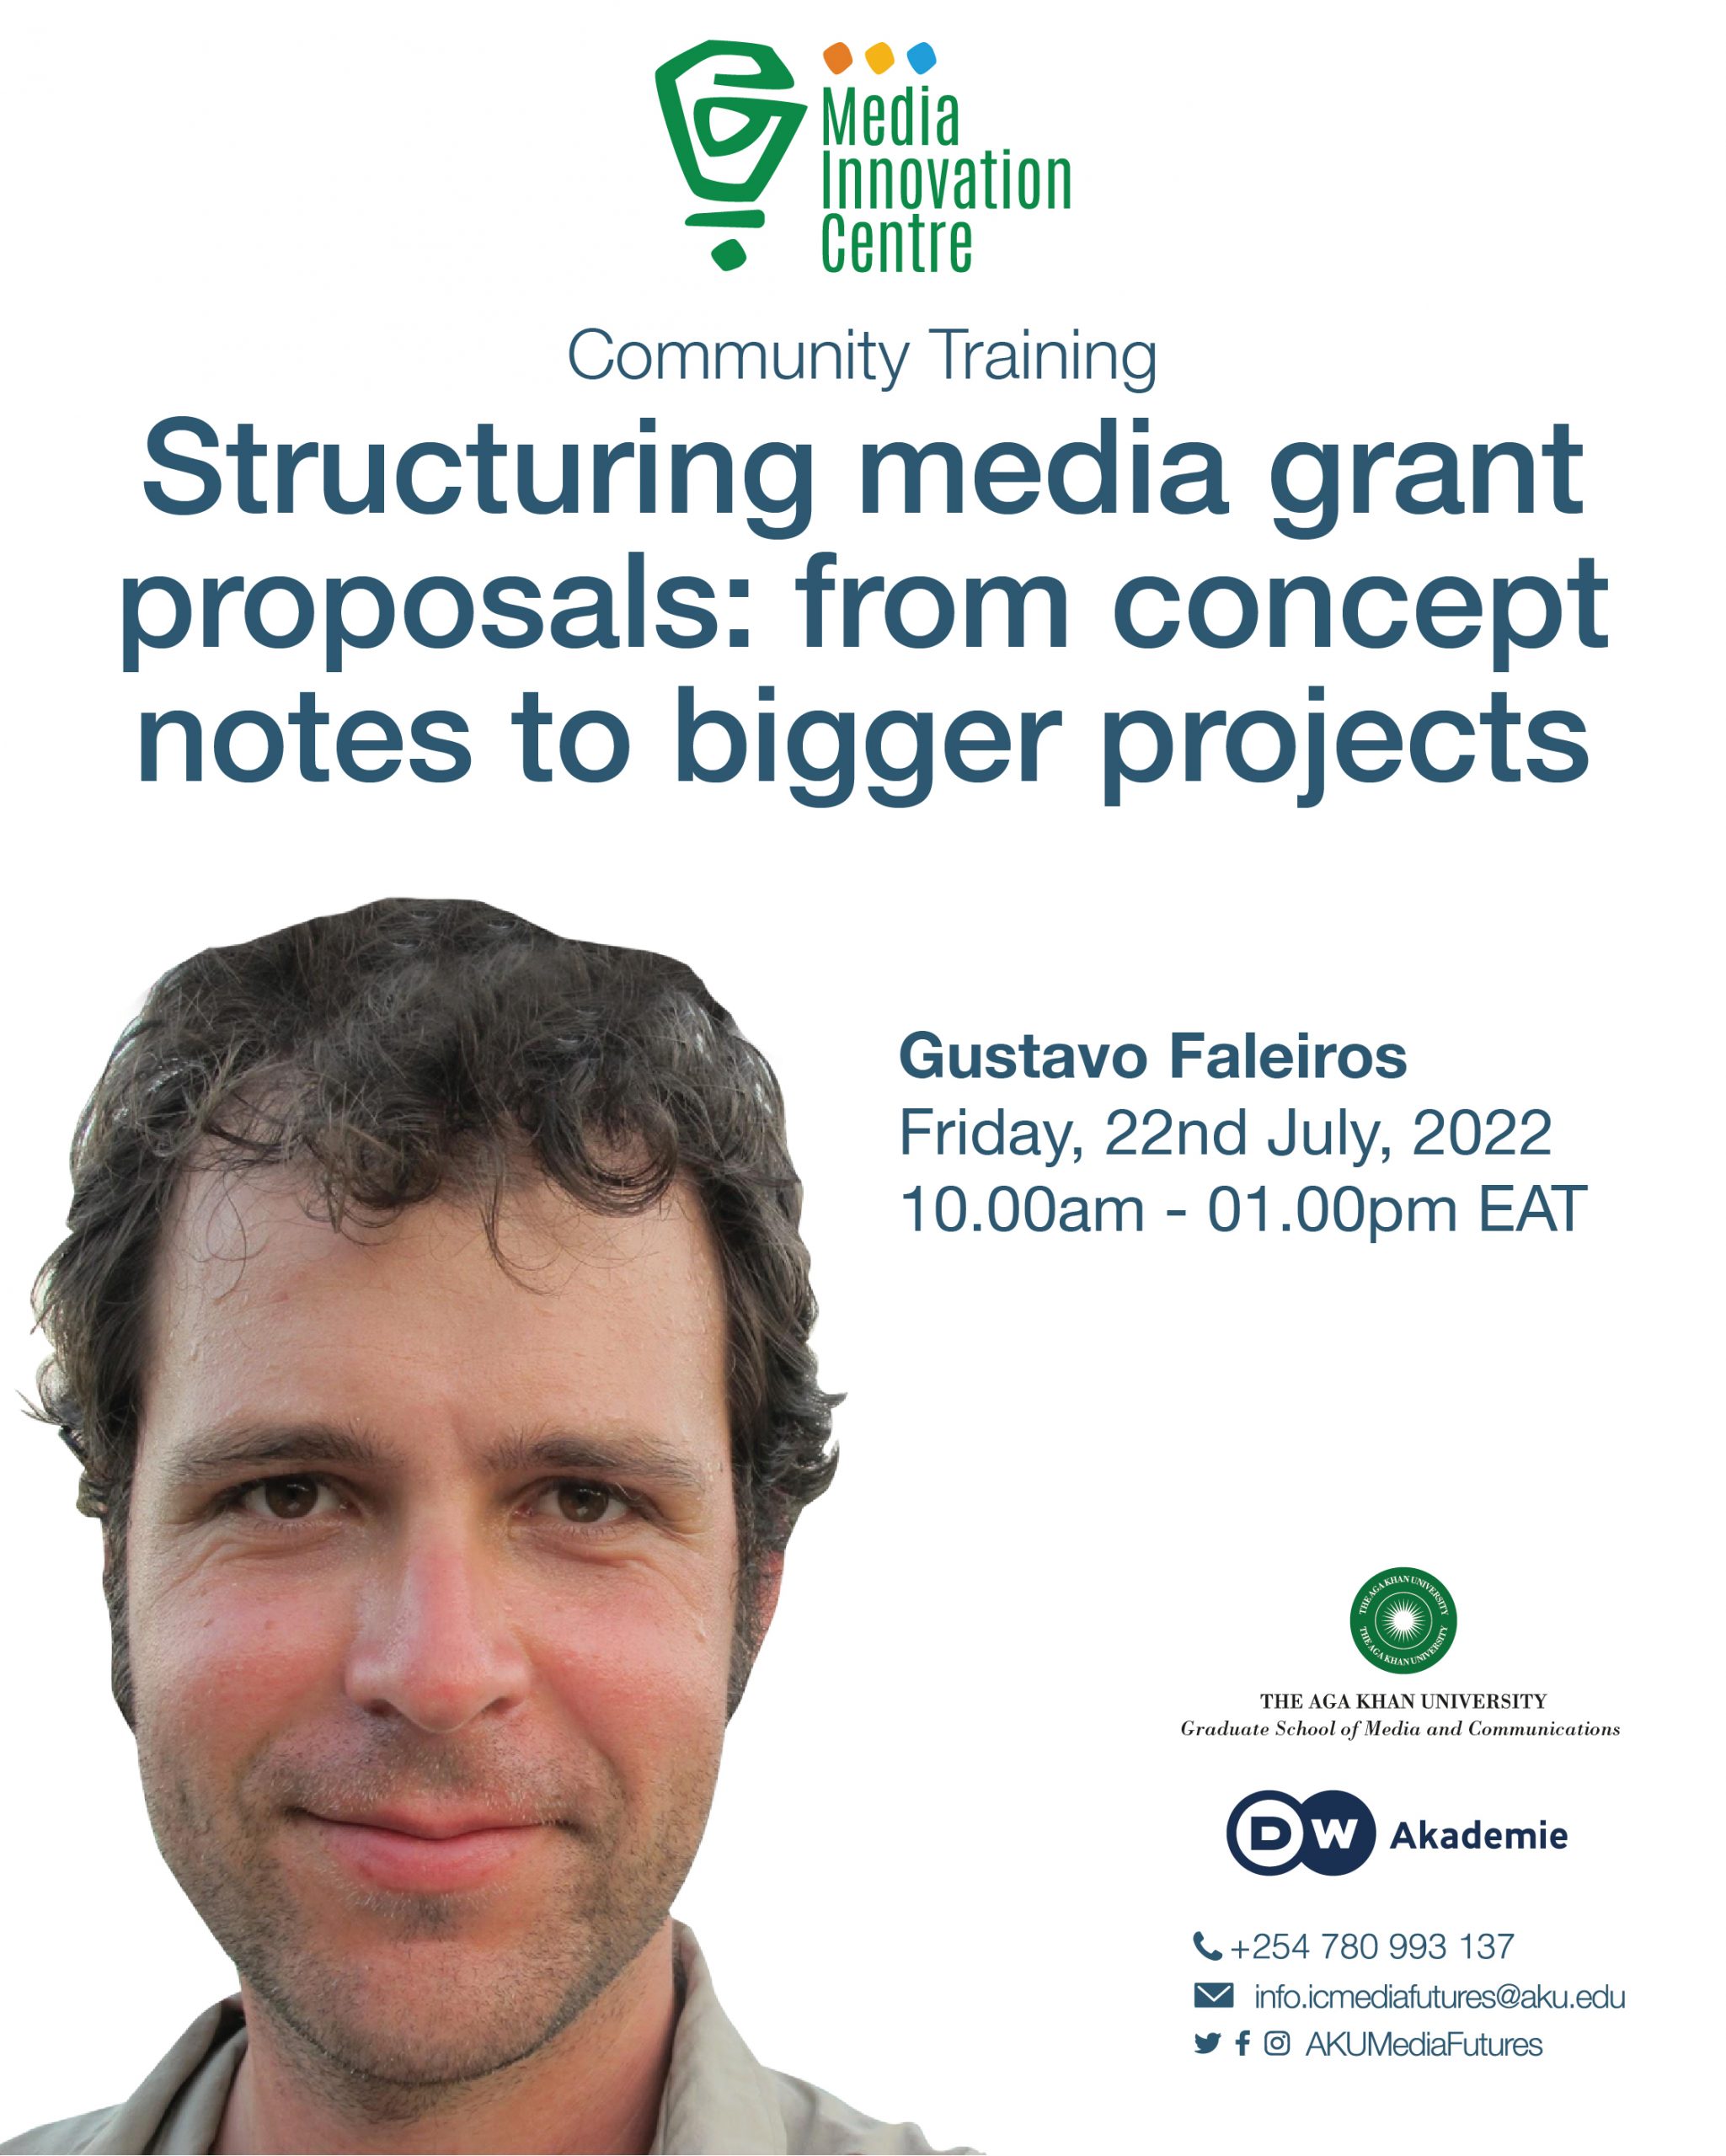  Structuring media grant proposals: from concept notes to bigger projects